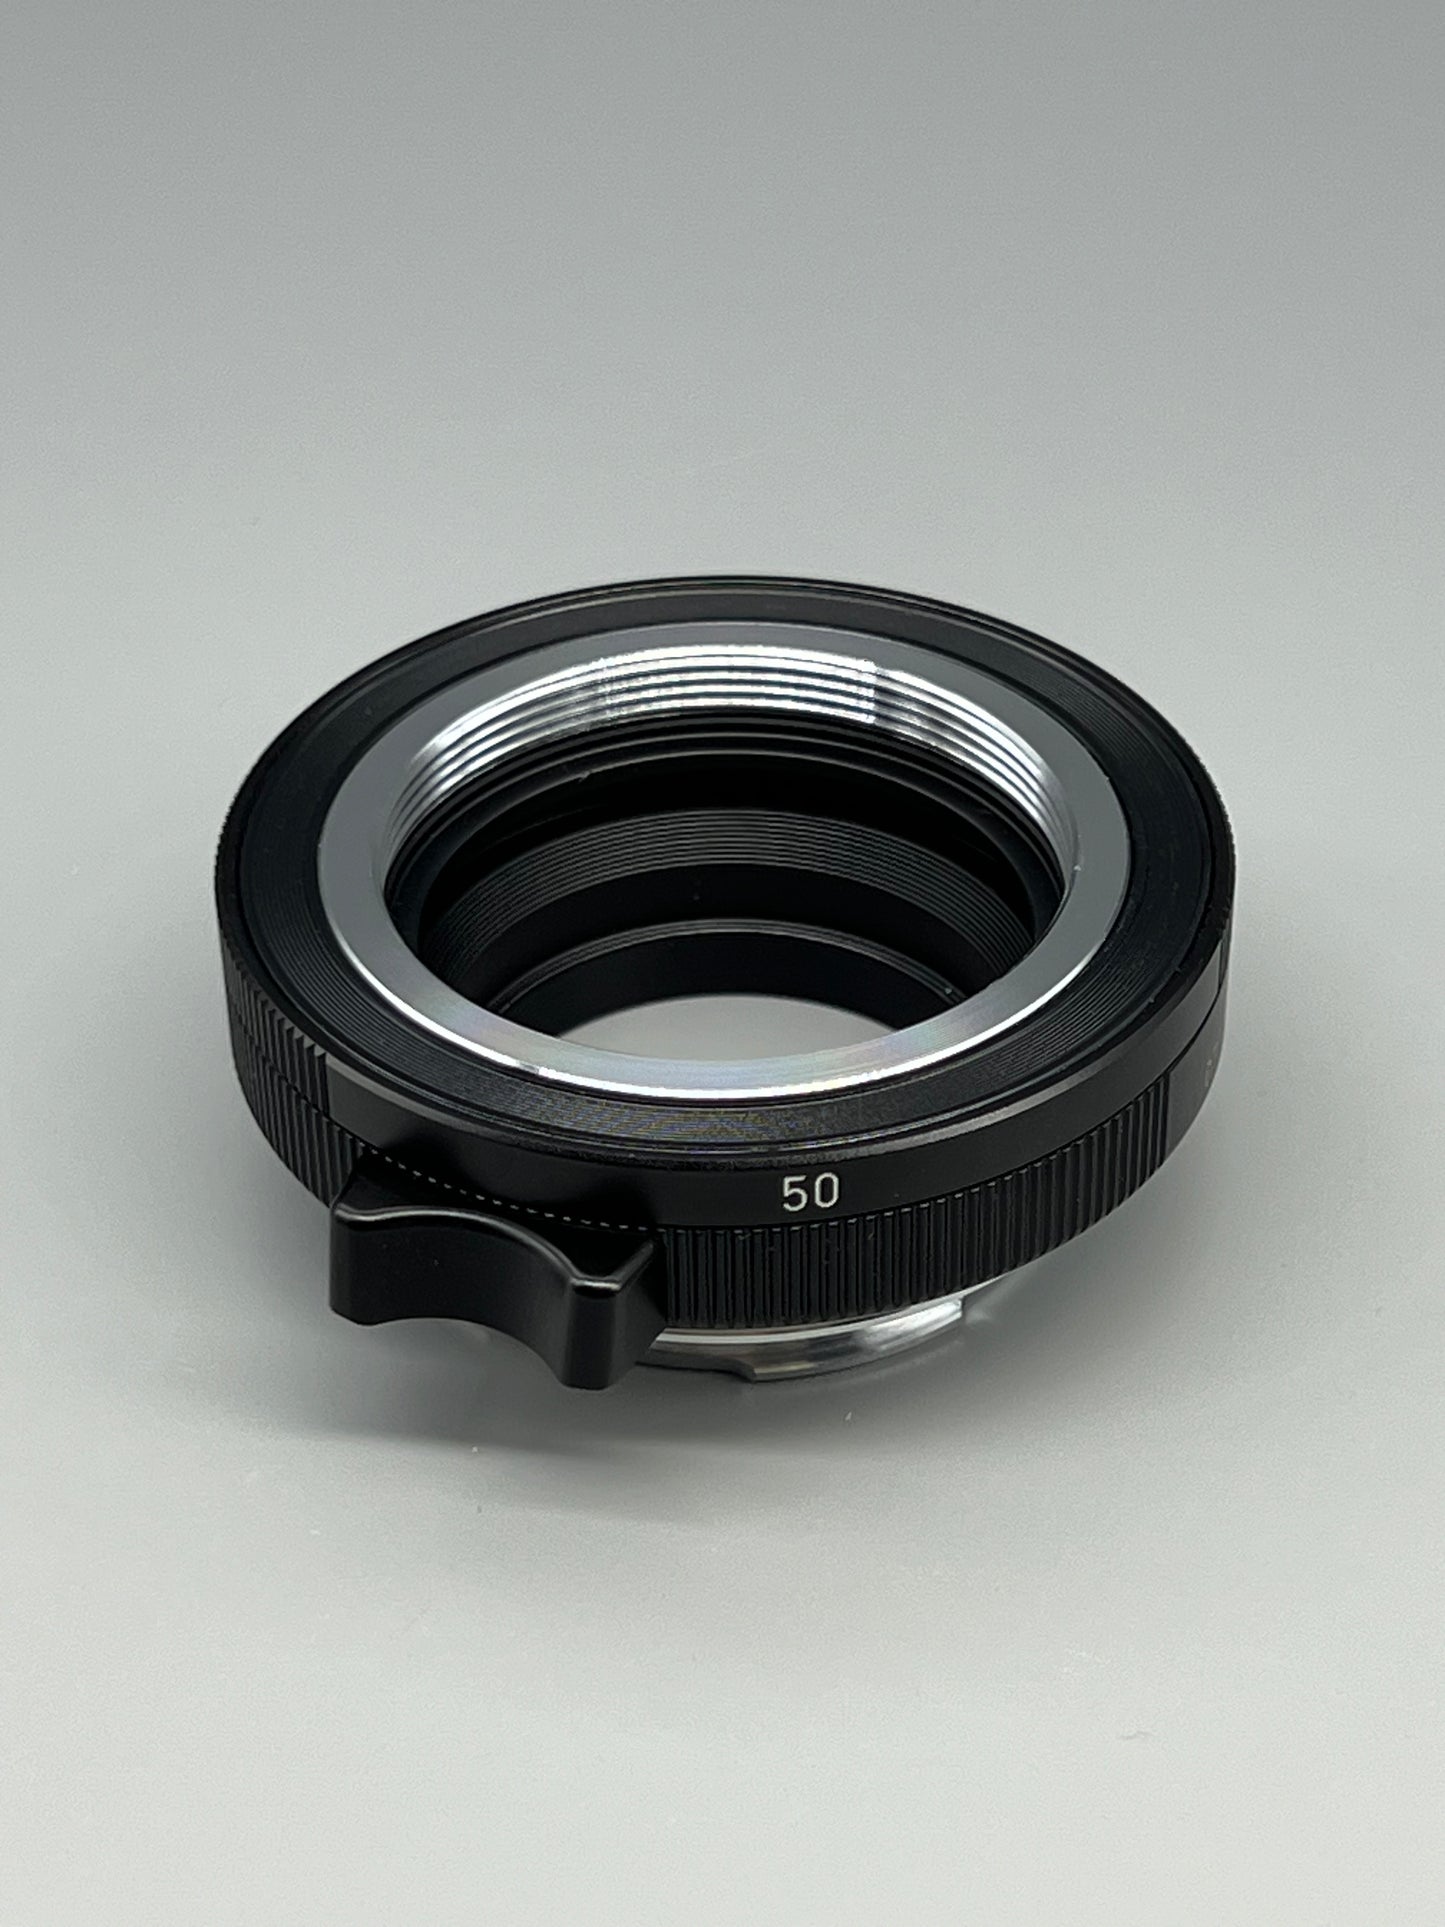 coupled M42-LM（Version 2.0） R50 rangefinder-link adapter M42 mount lens to Leica M camera